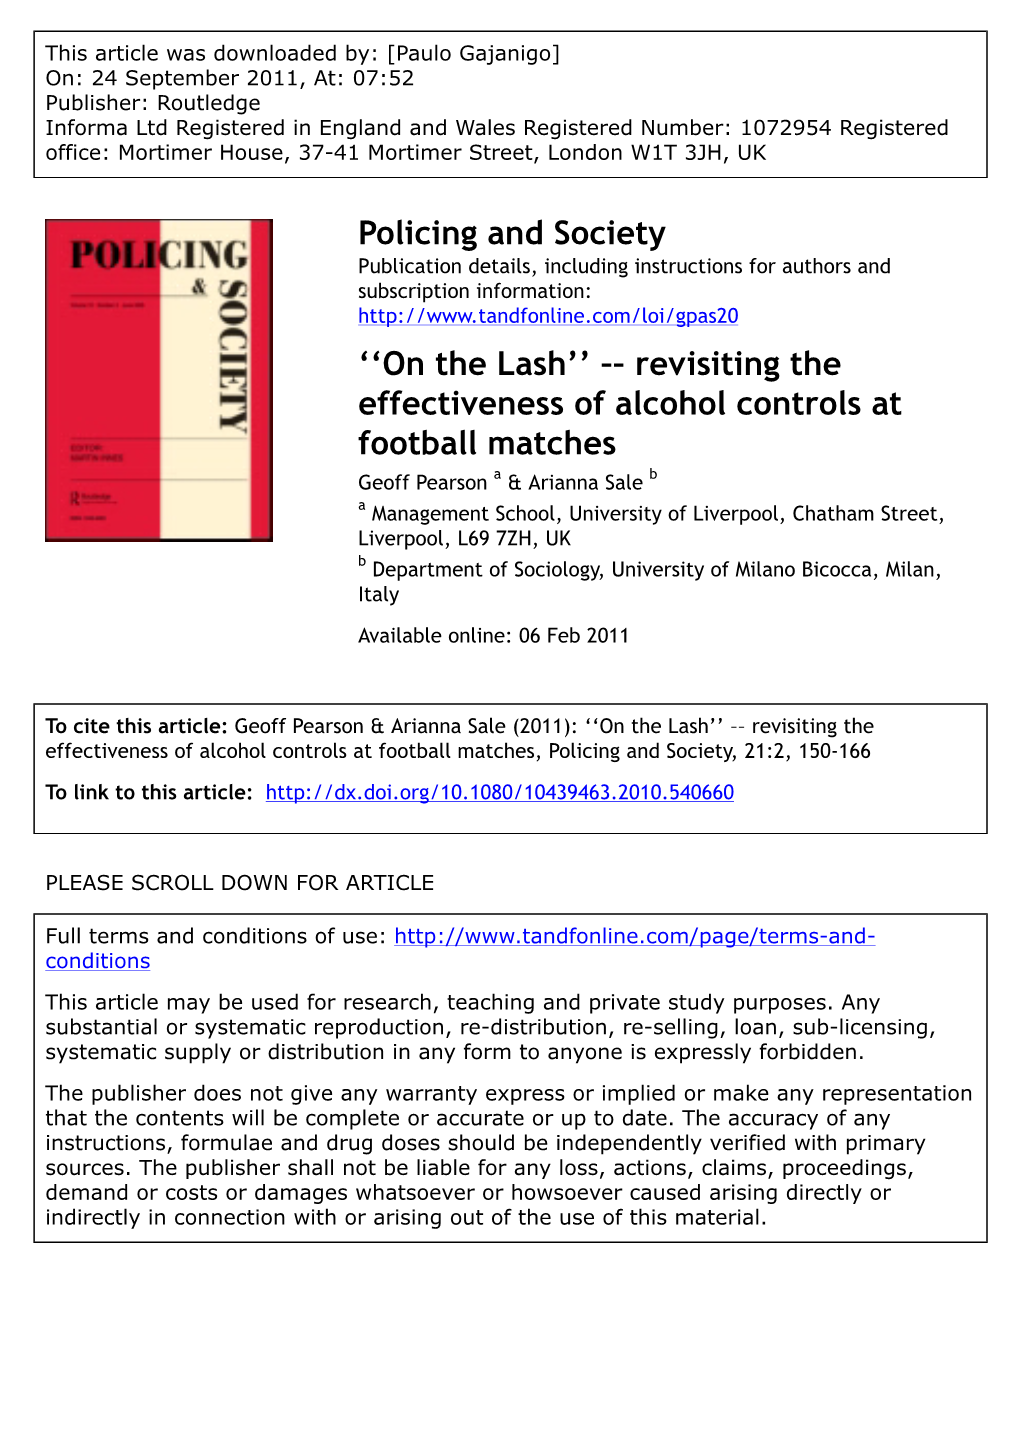 Revisiting the Effectiveness of Alcohol Controls at Football Matches